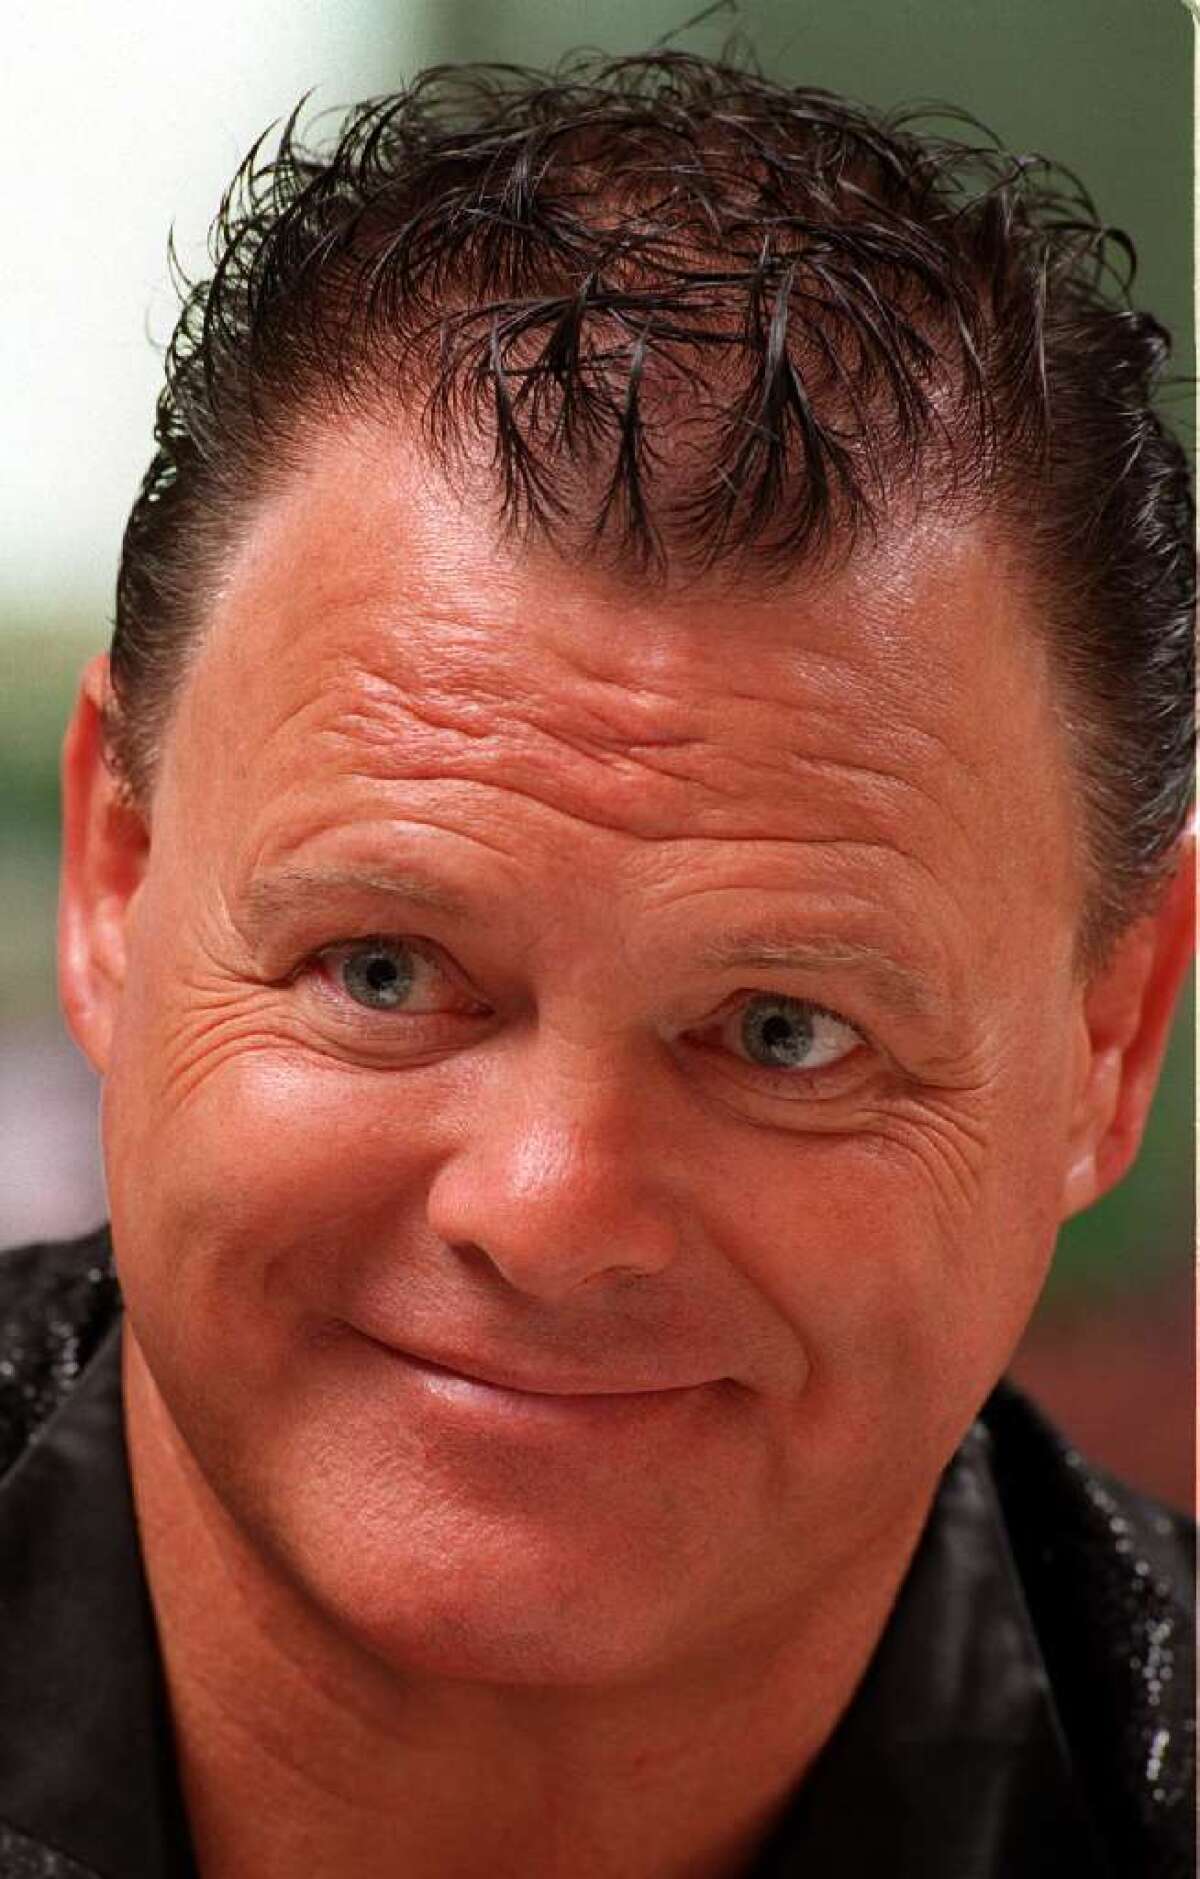 Jerry Lawler (seen here in 2000) says he could revive his old feud with the late Andy Kaufman.